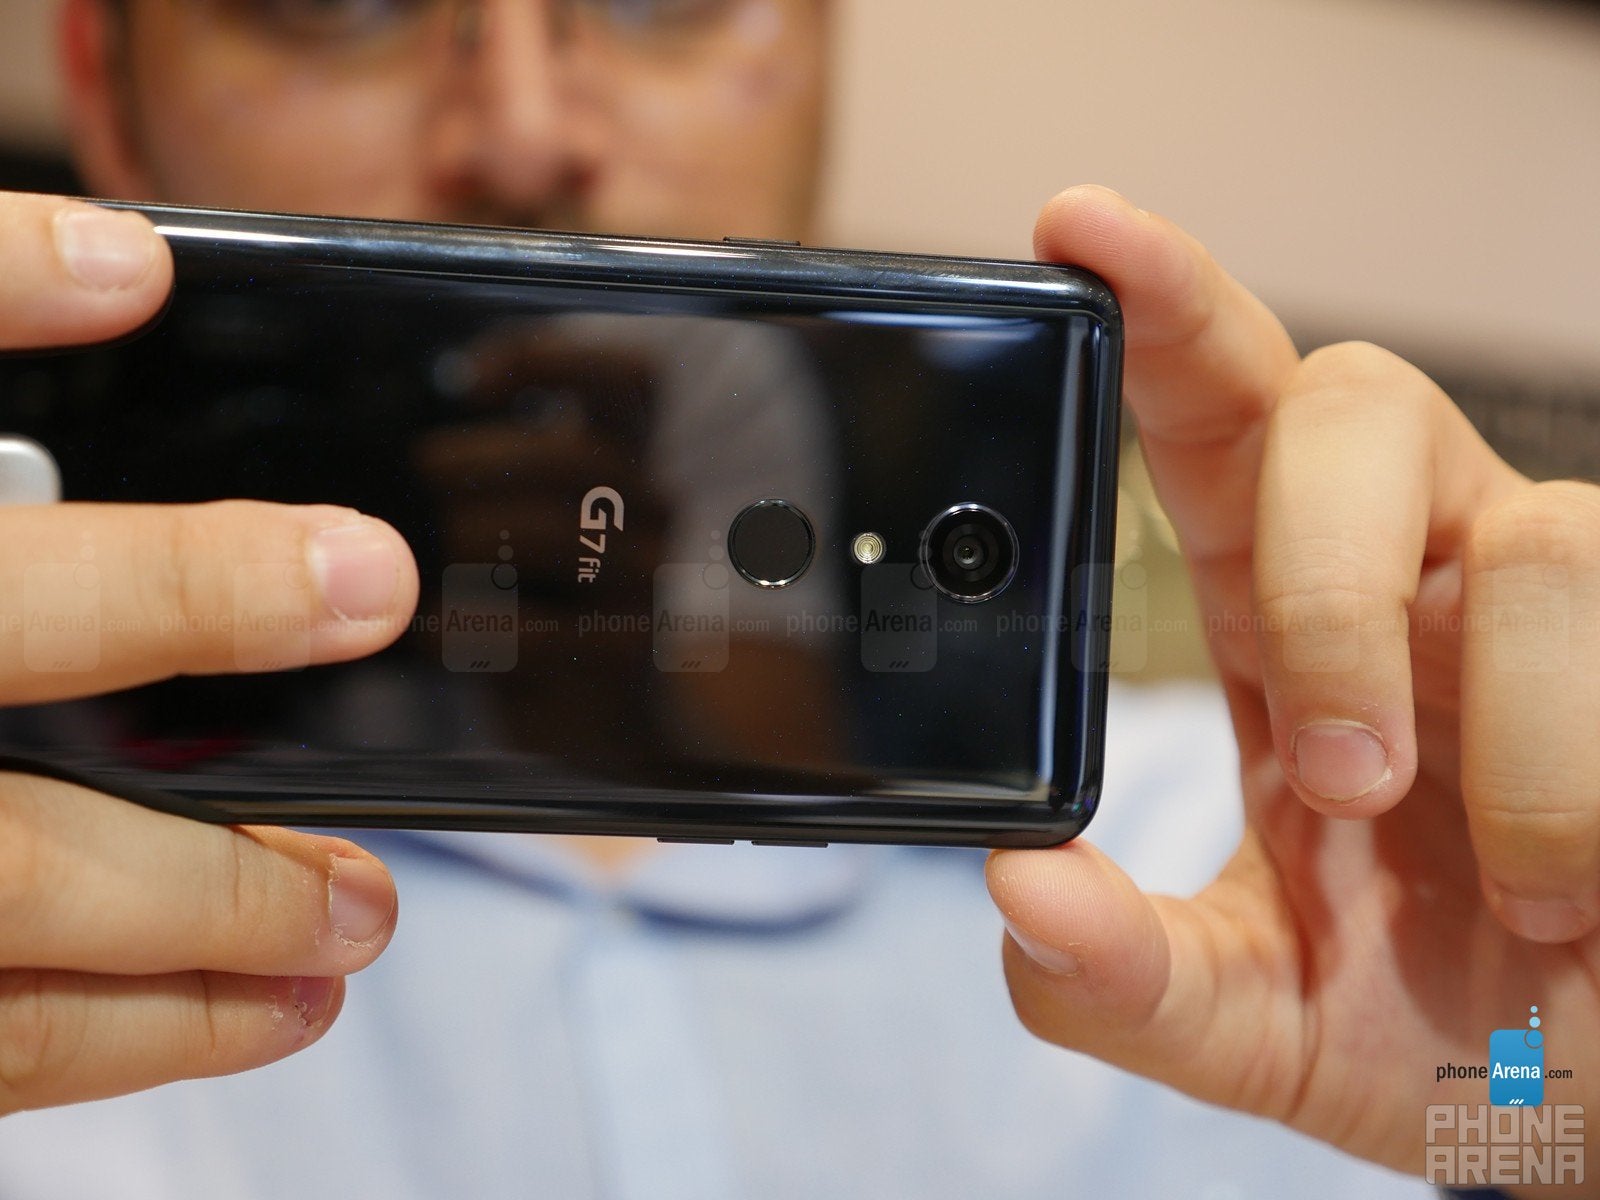 LG G7 Fit hands-on: LG's newest mid-ranger doesn't make a really strong case for itself